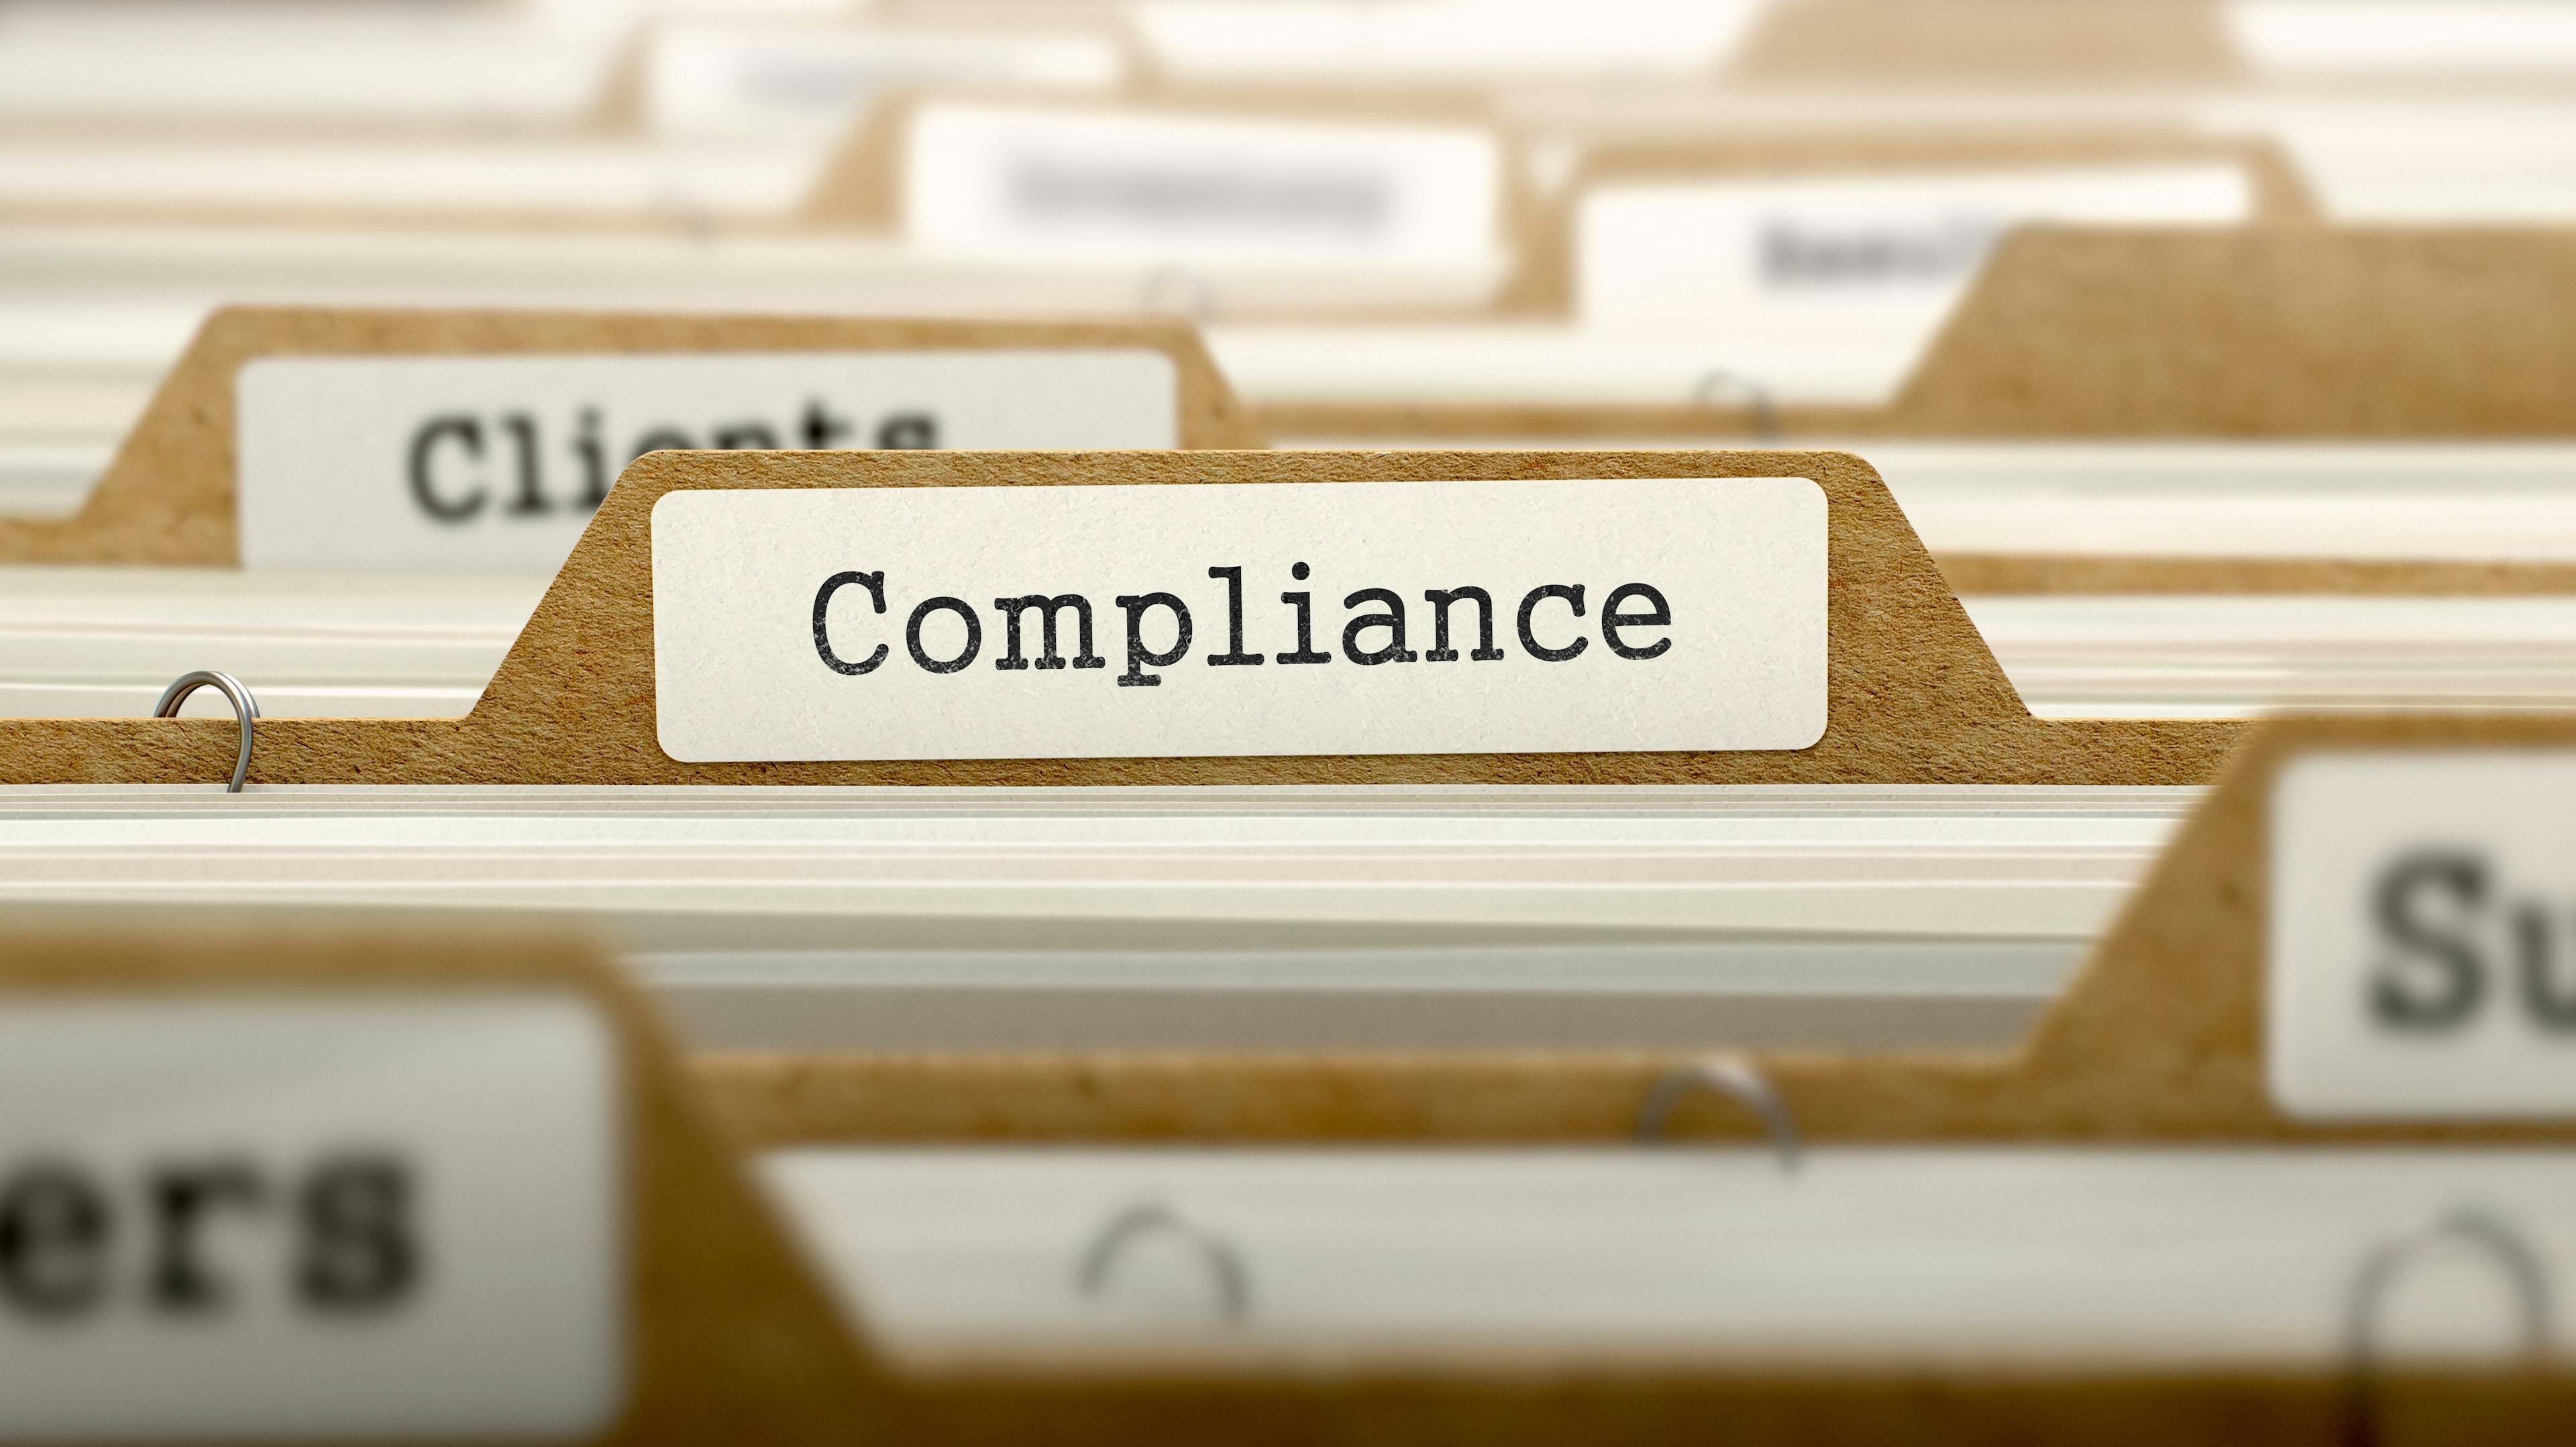 DOJ Issues Important Updates to Evaluation of Corporate Compliance Guidance 